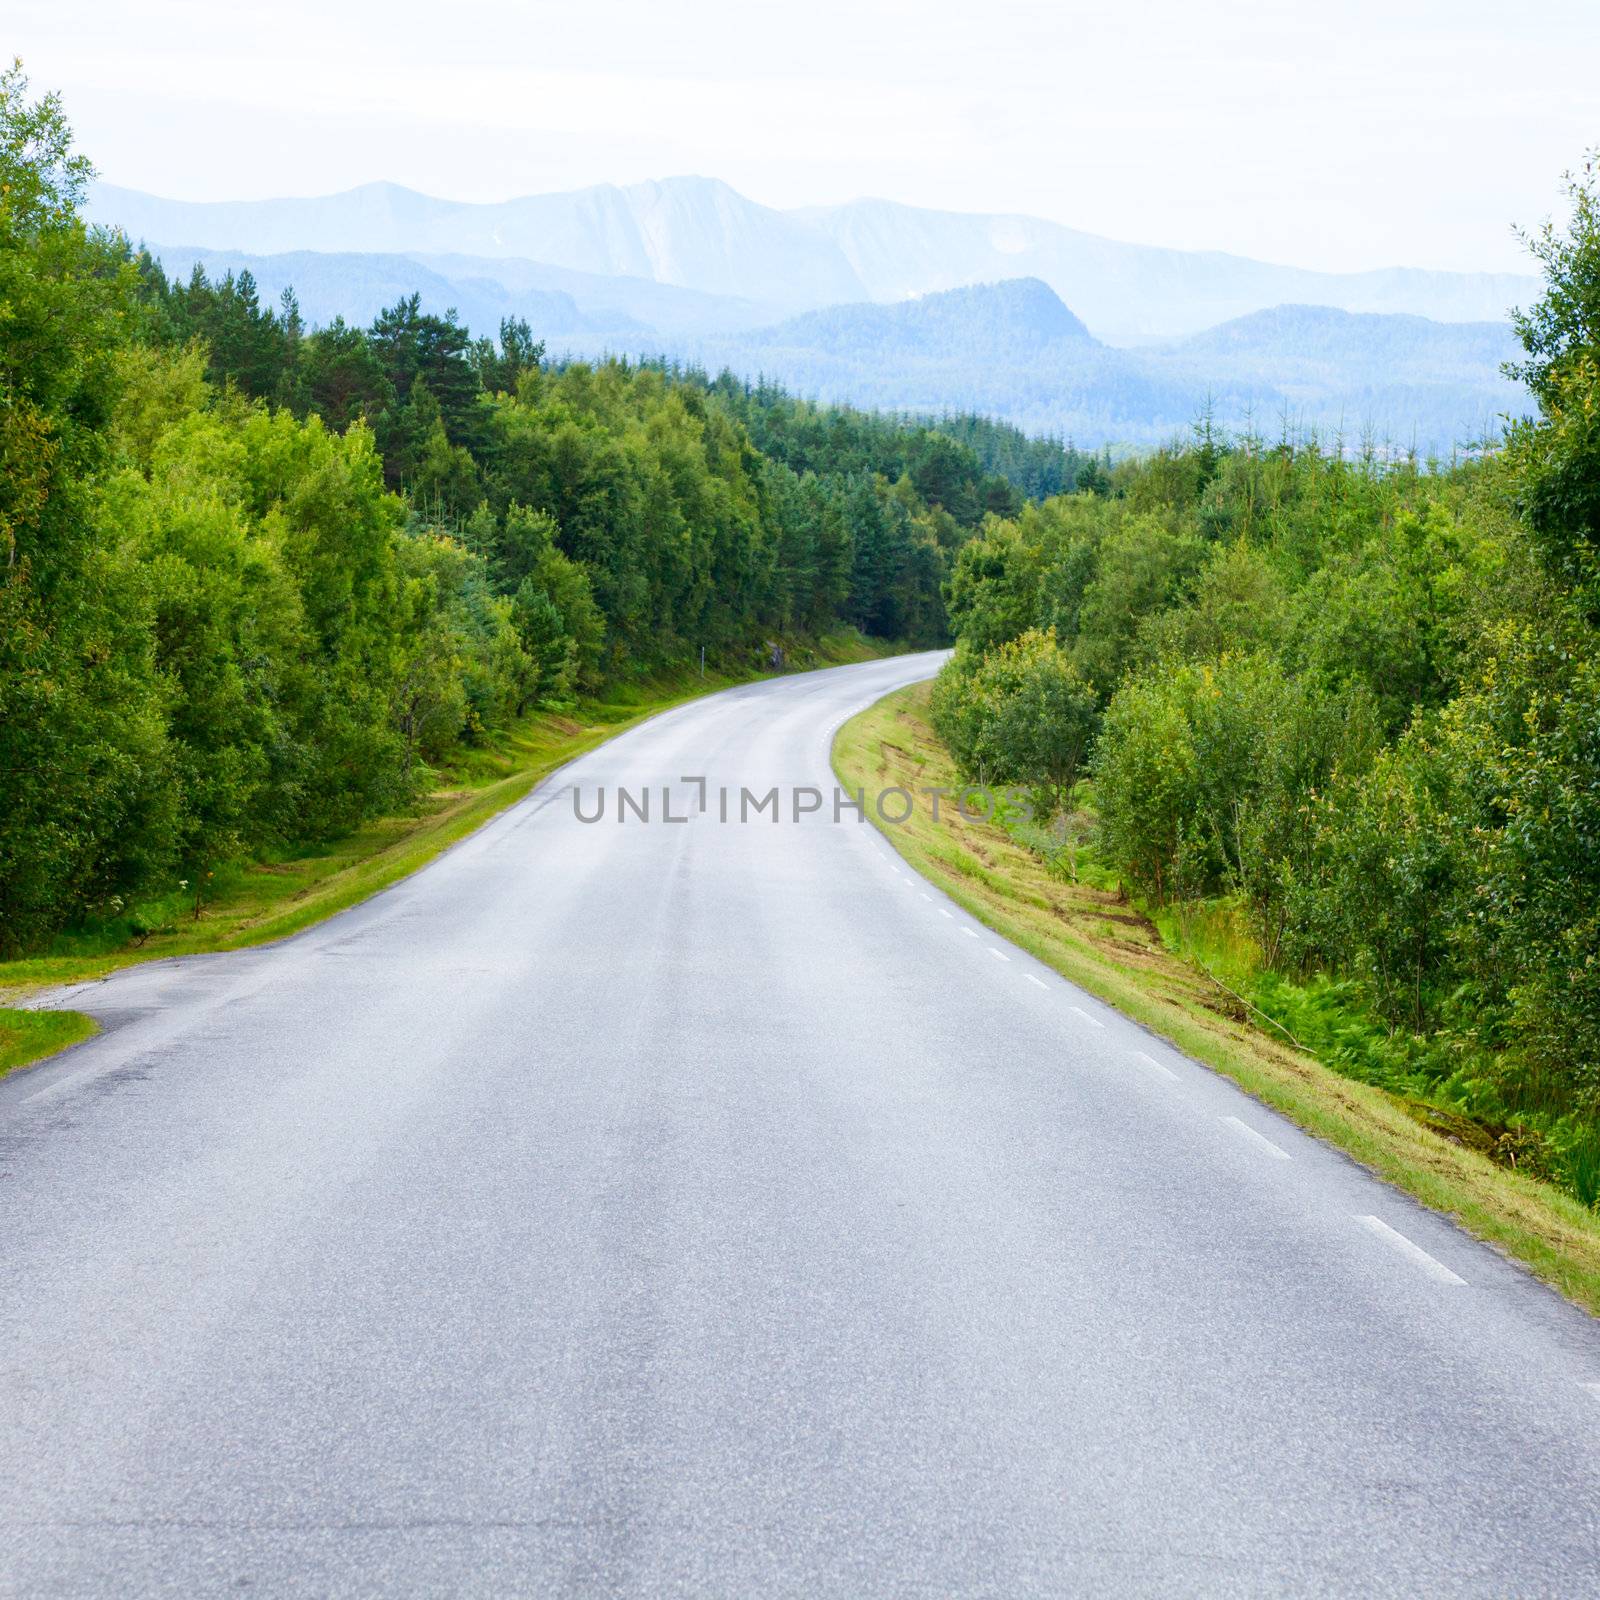 Scenic winding road through green forest in Norway